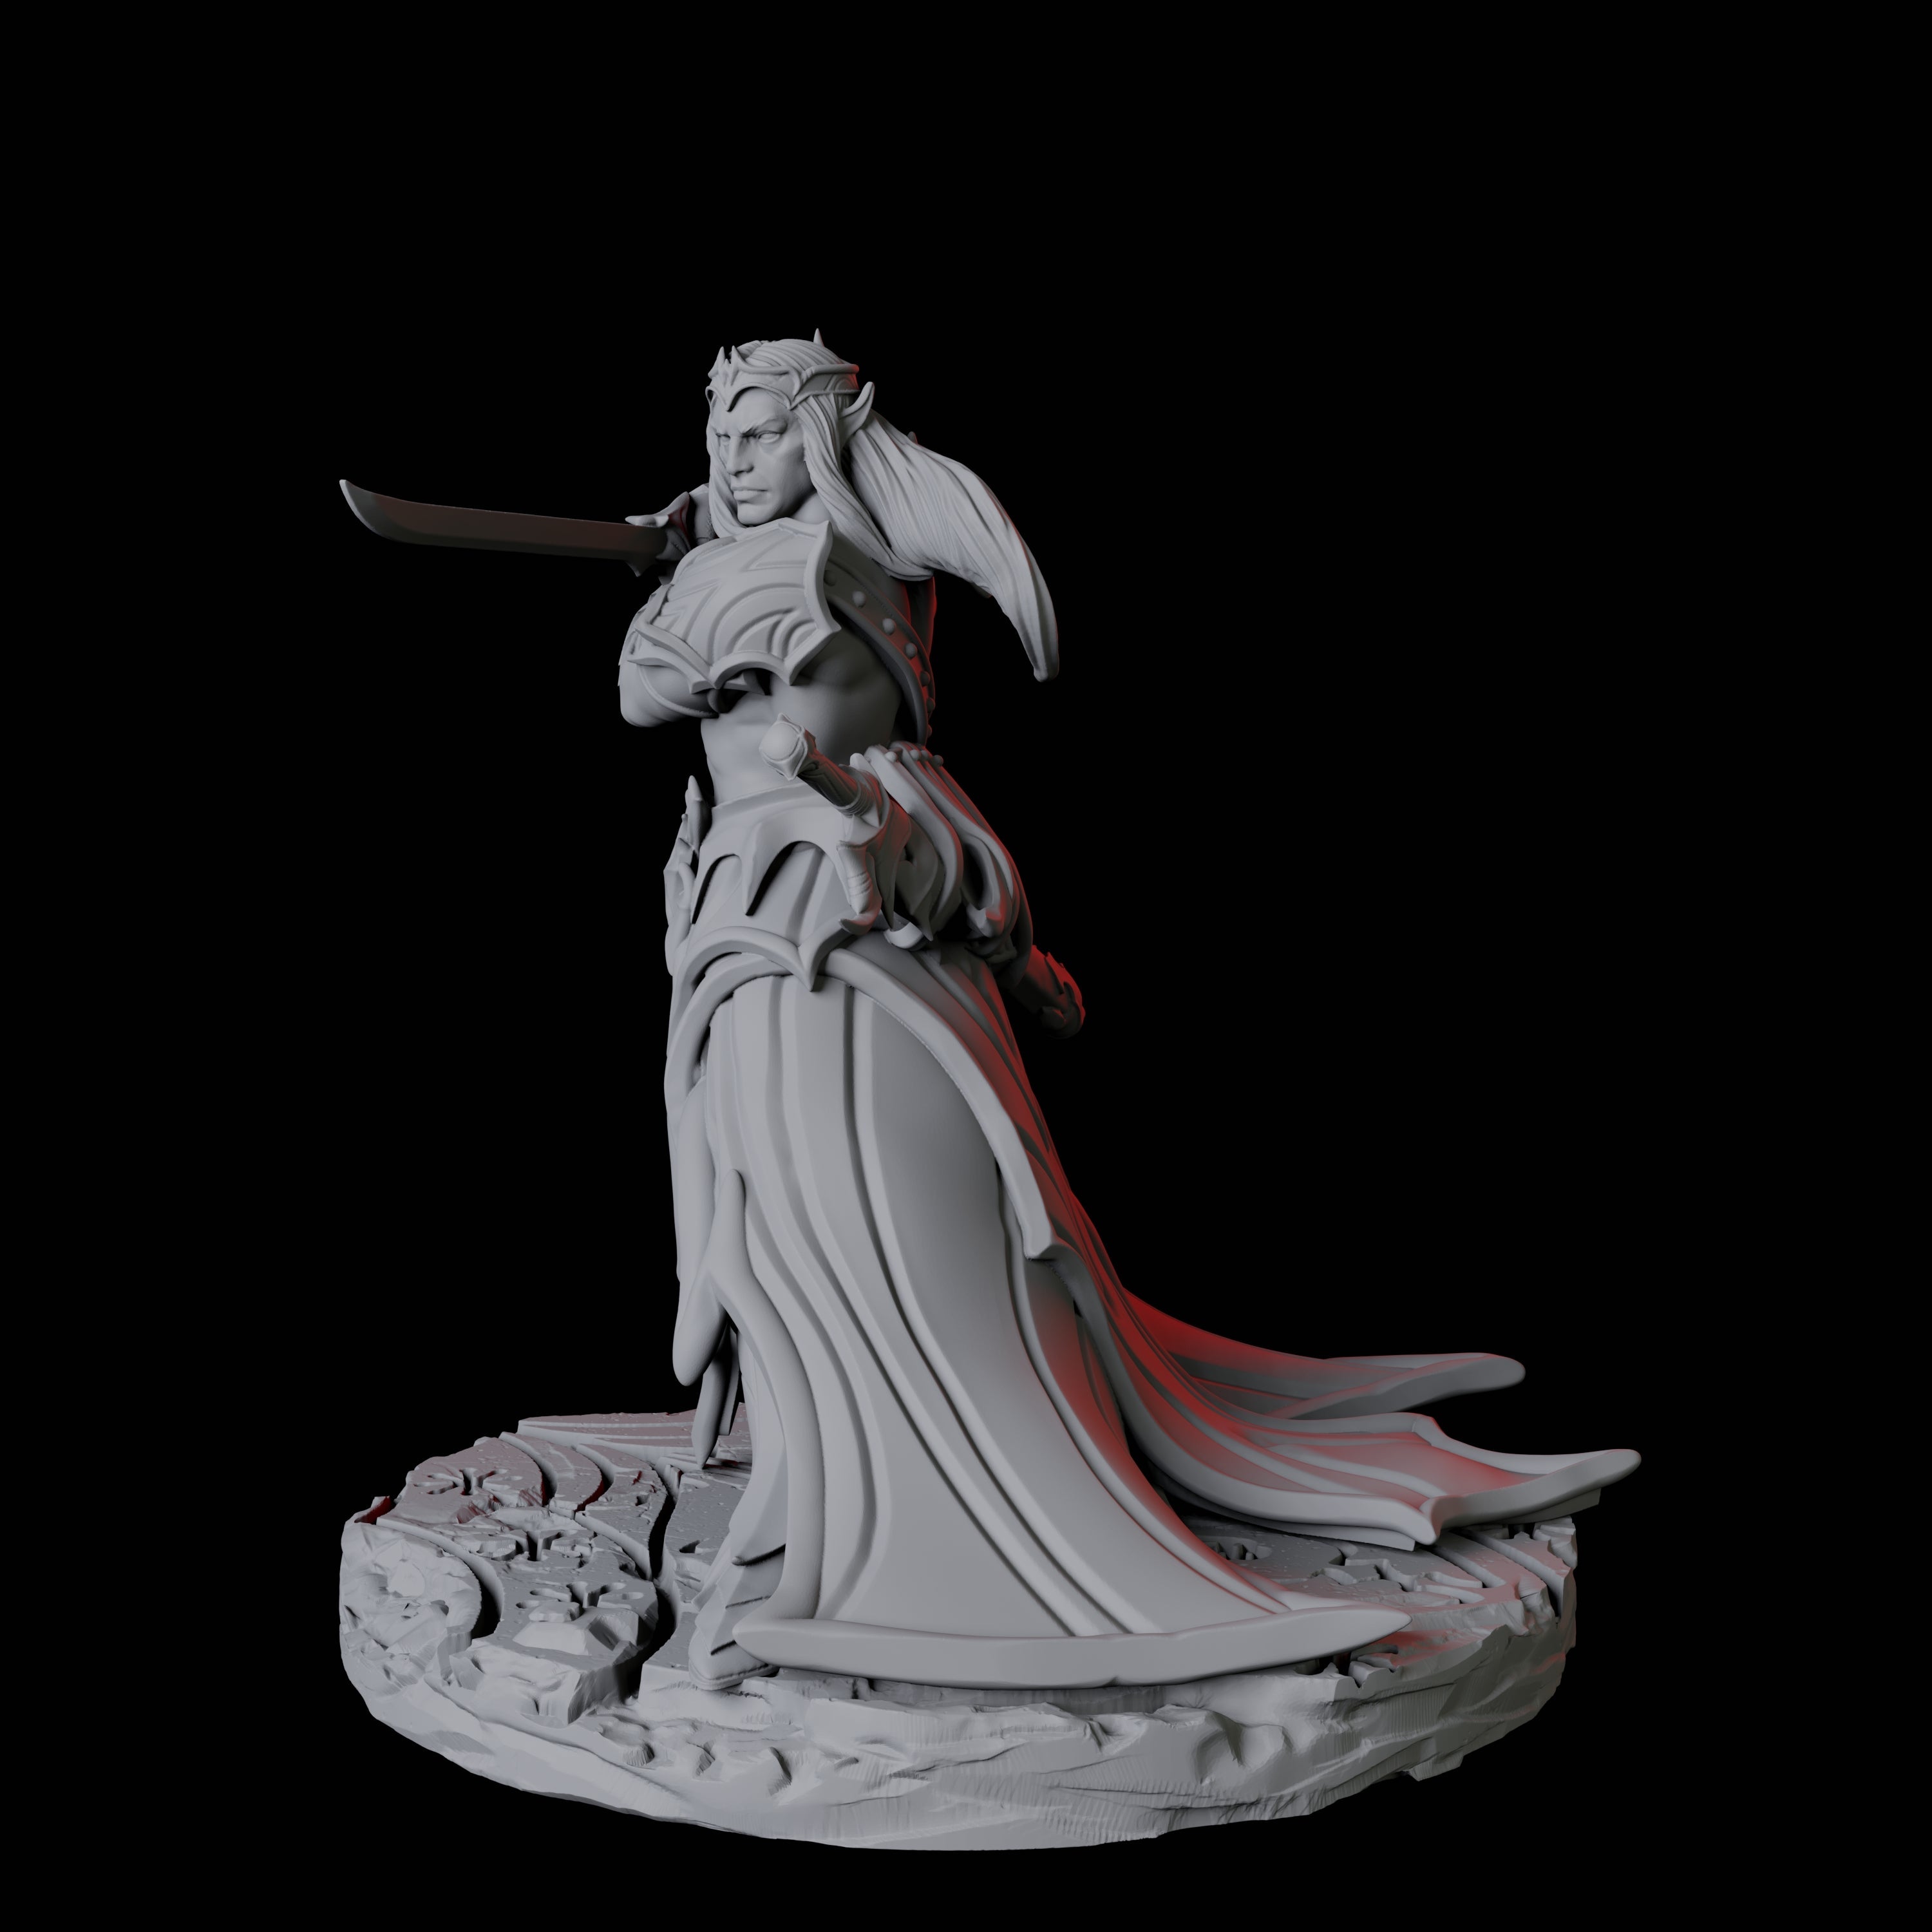 Composed Swordsmaster Miniature for Dungeons and Dragons, Pathfinder or other TTRPGs